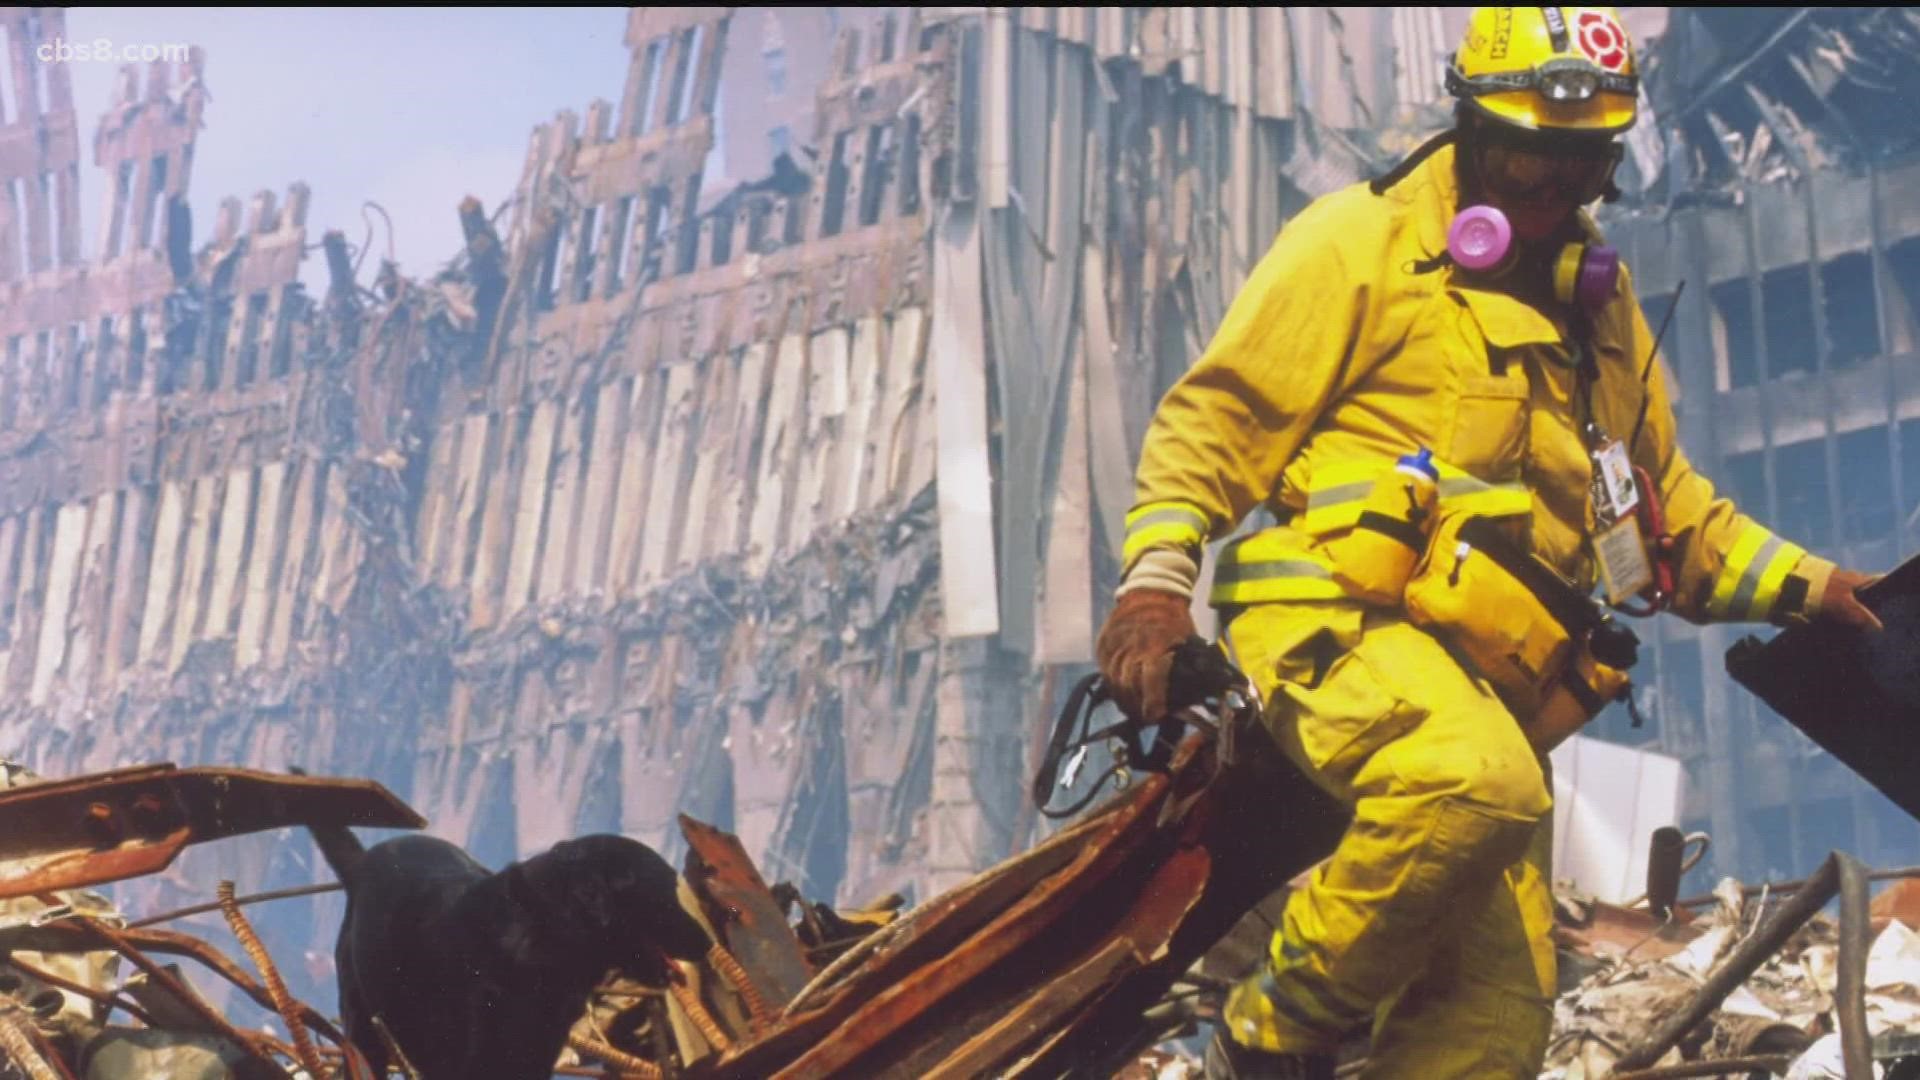 The San Diego Fire Department deployed 80 fire fighters to New York City on Sept. 11, 2001.